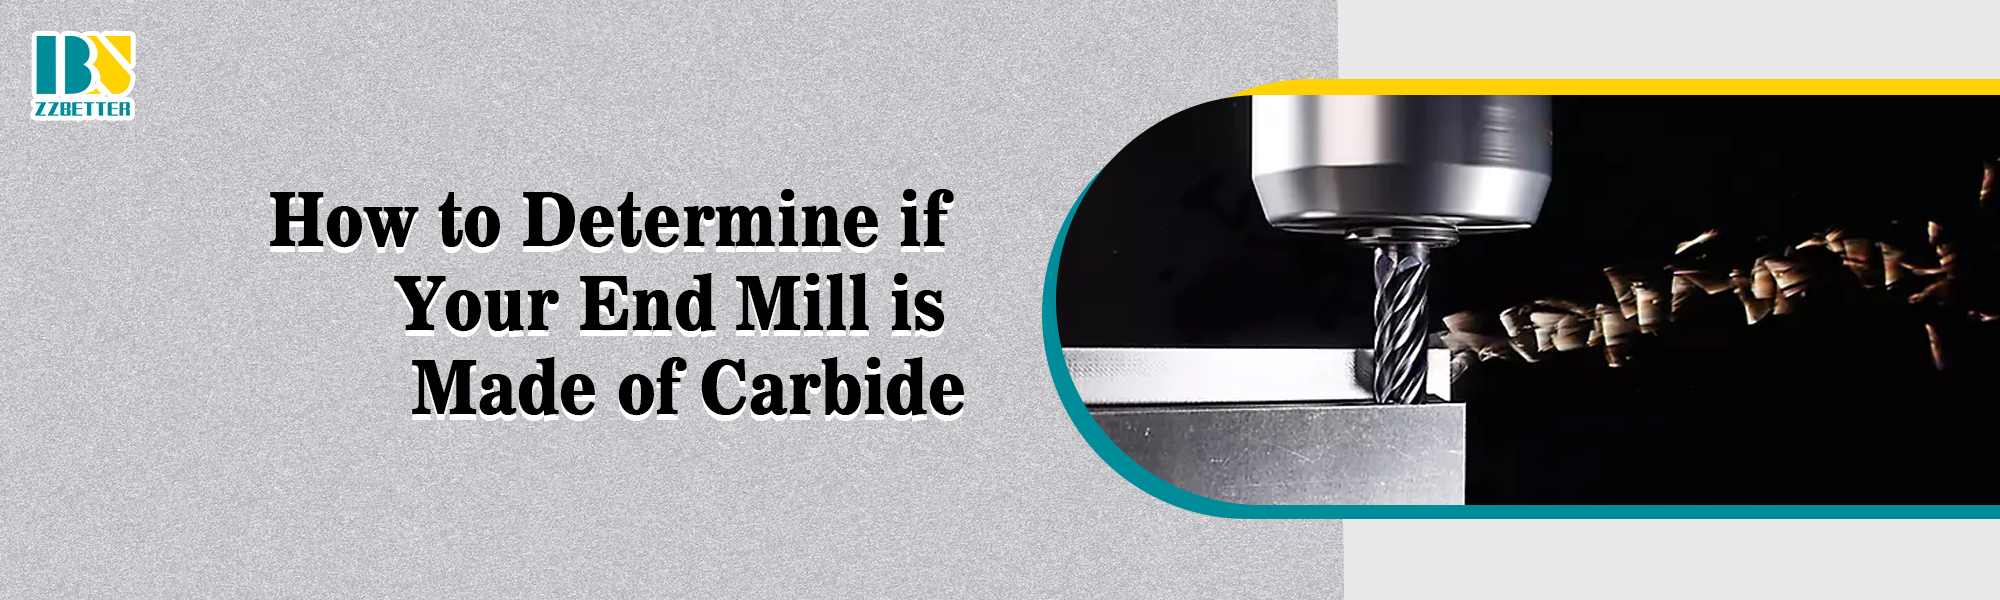 How to Determine if Your End Mill is Made of Carbide？